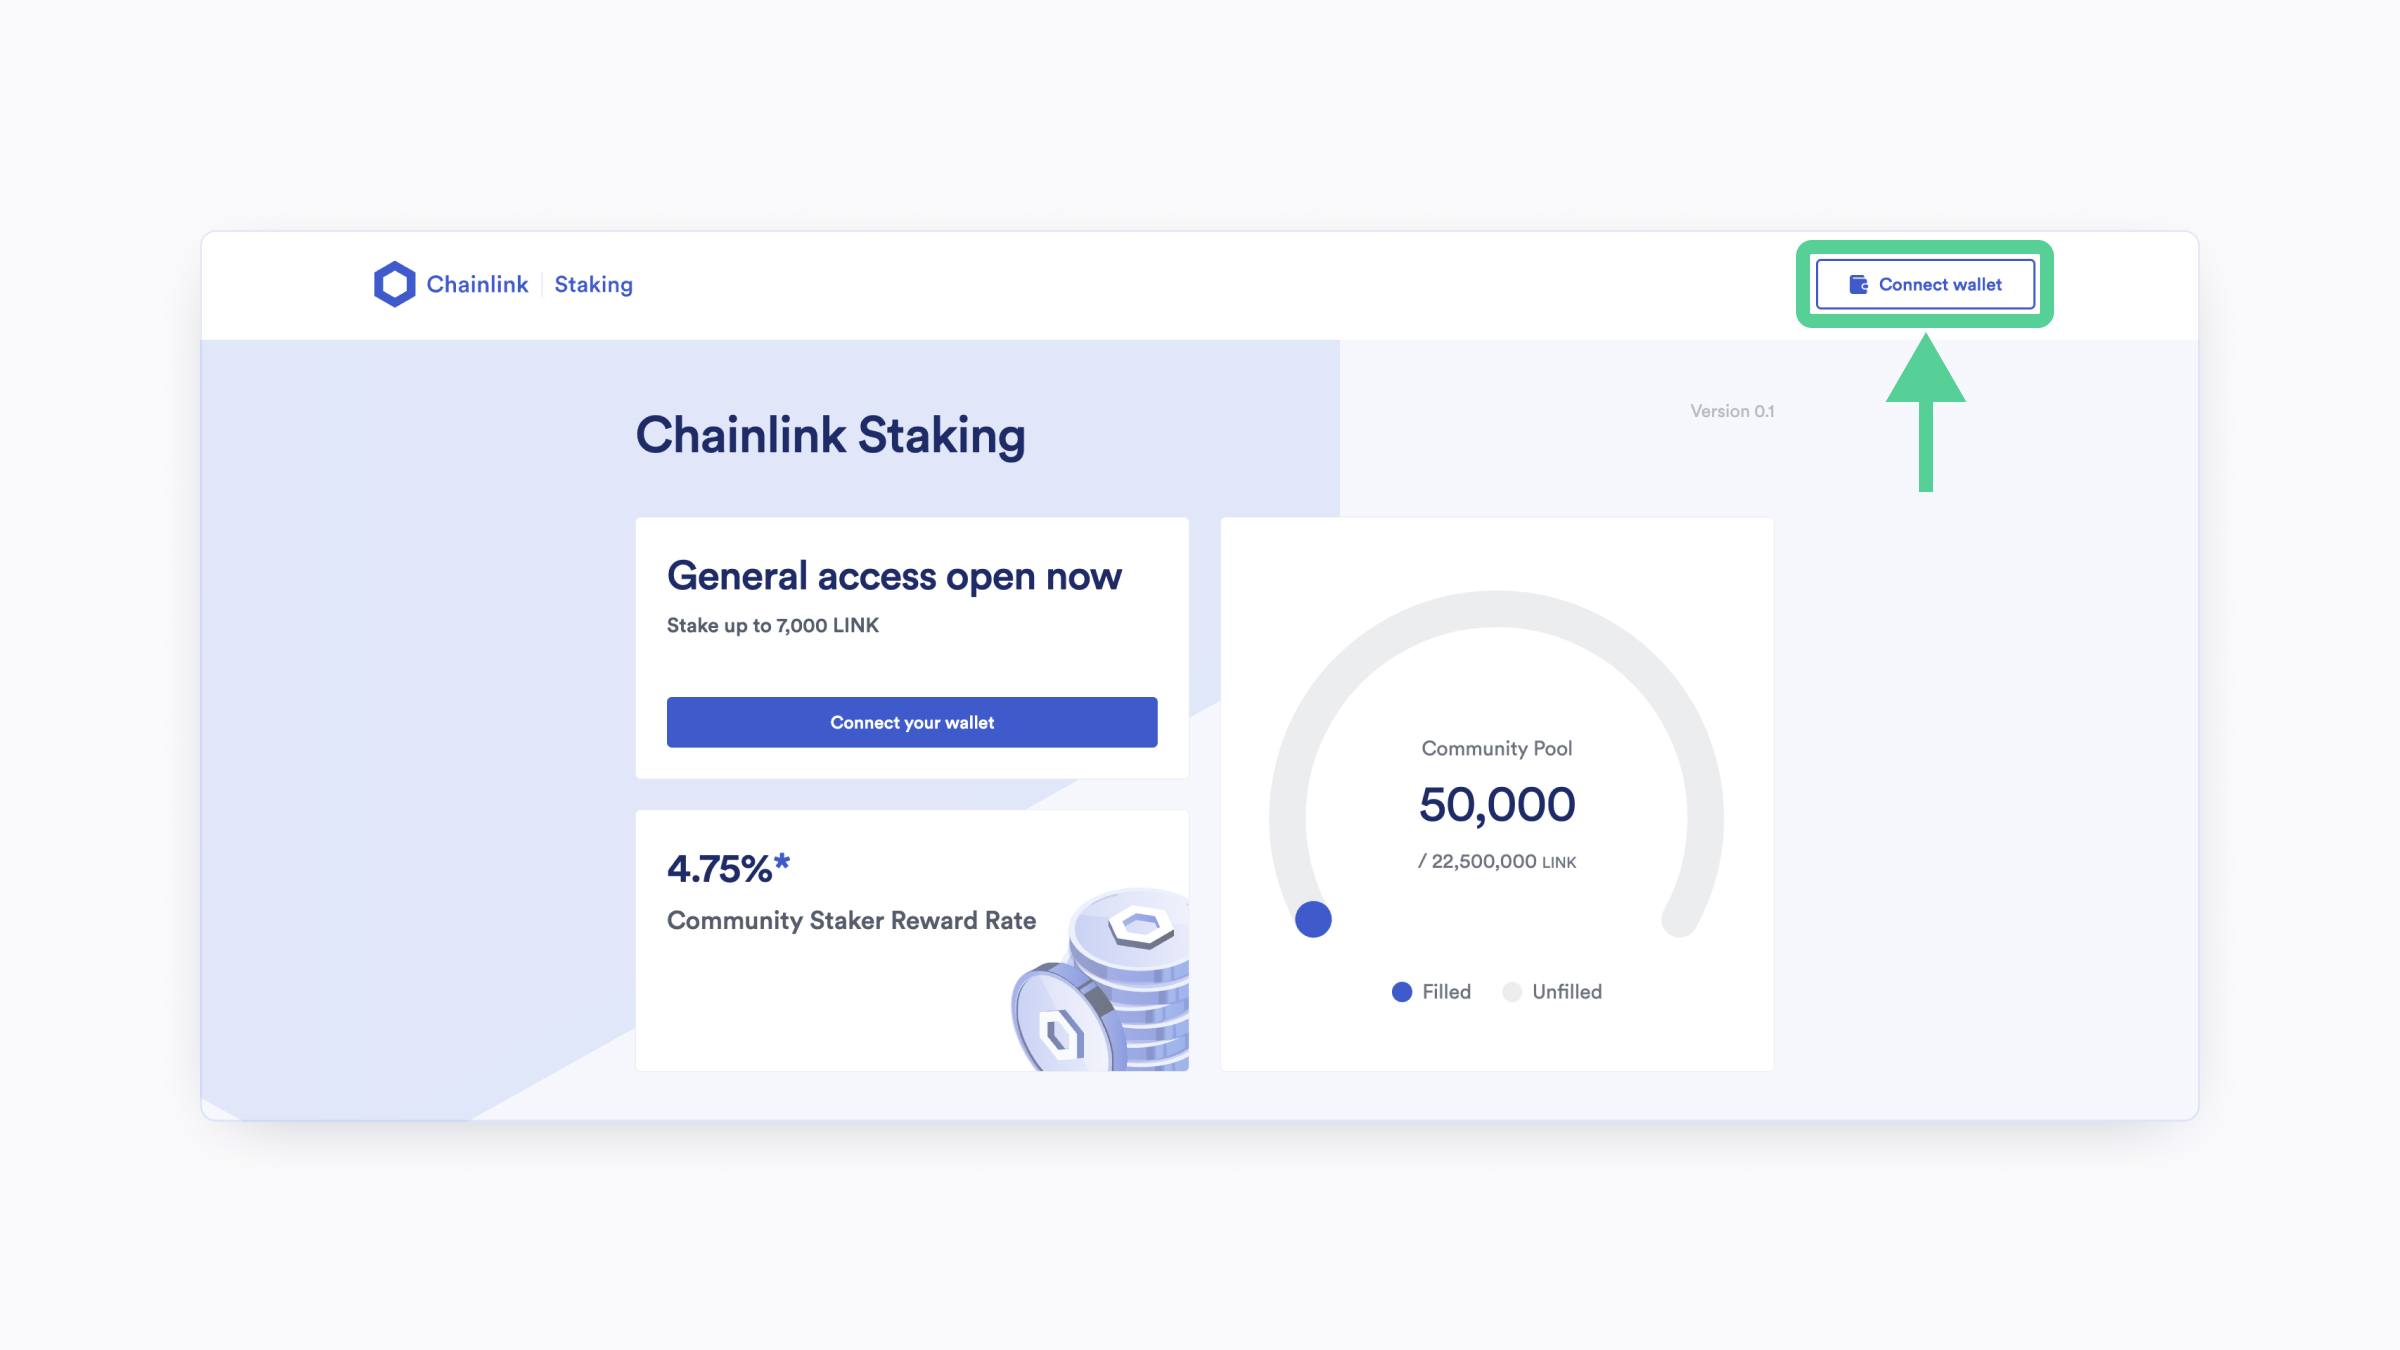 A screenshot of the Chainlink Staking app highlighting "Connect wallet"